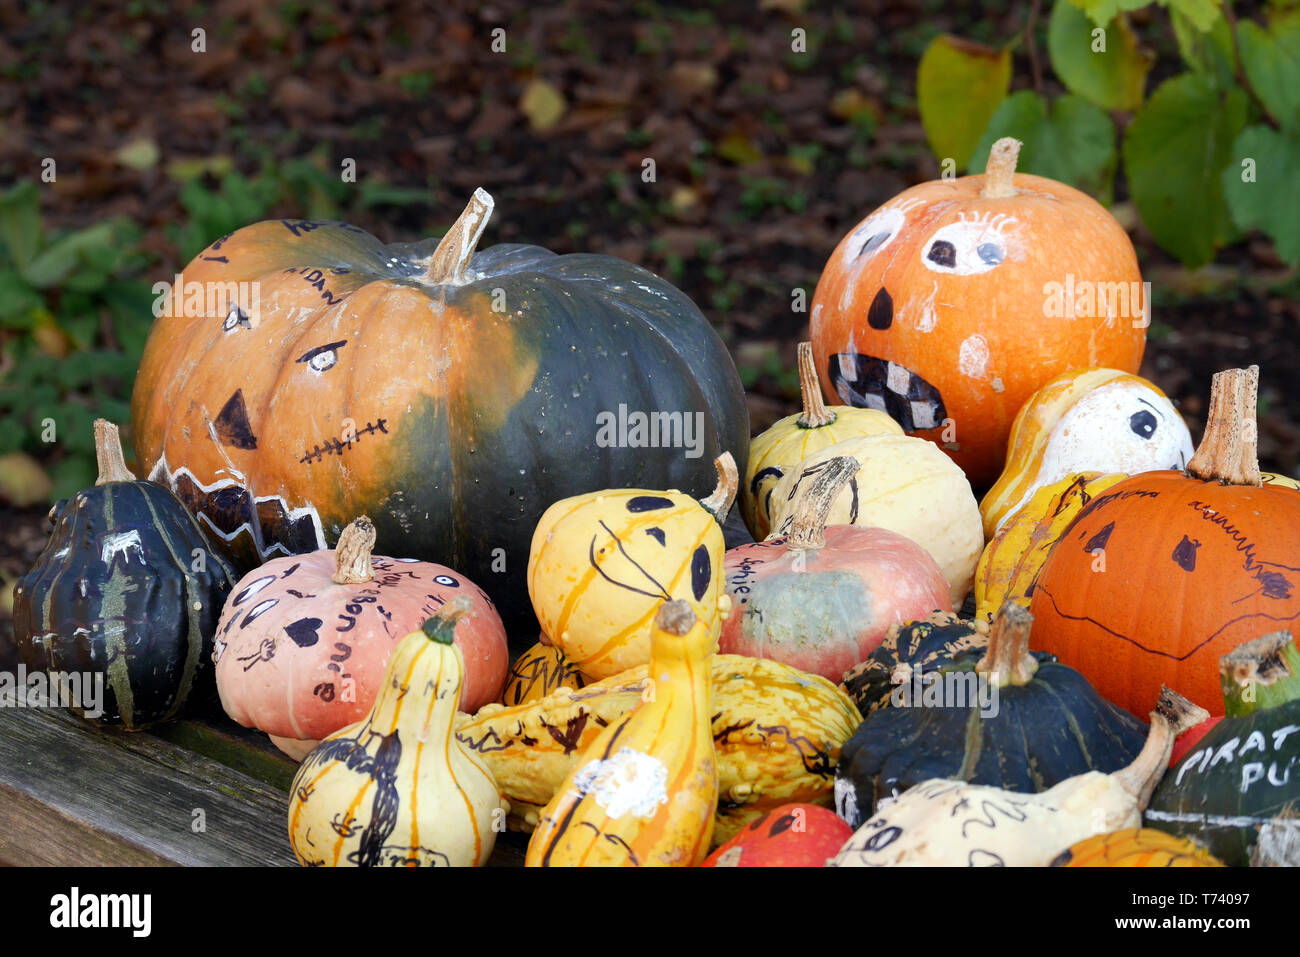 An assortment of Autumnal Pumpkins, Gourds and Squashes, with various painted faces. Stock Photo